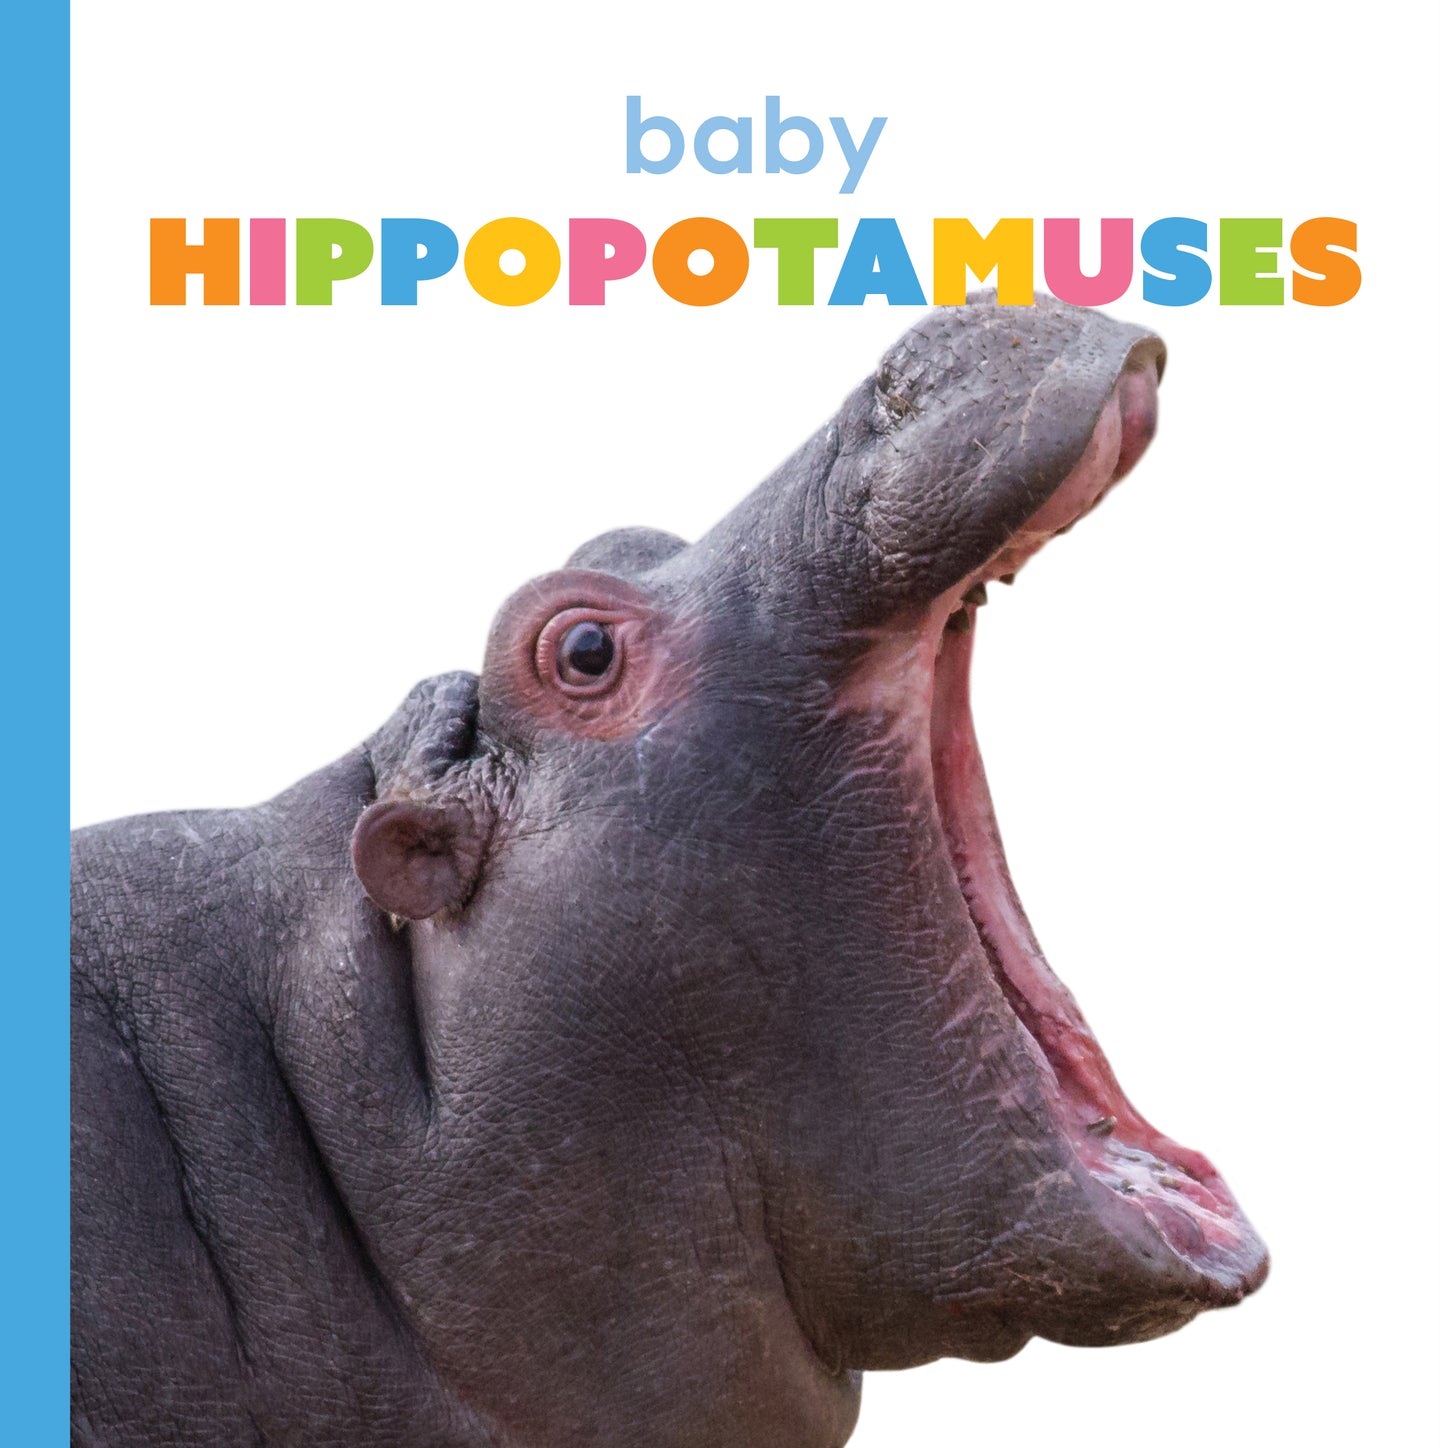 Starting Out: Baby Hippopotamuses